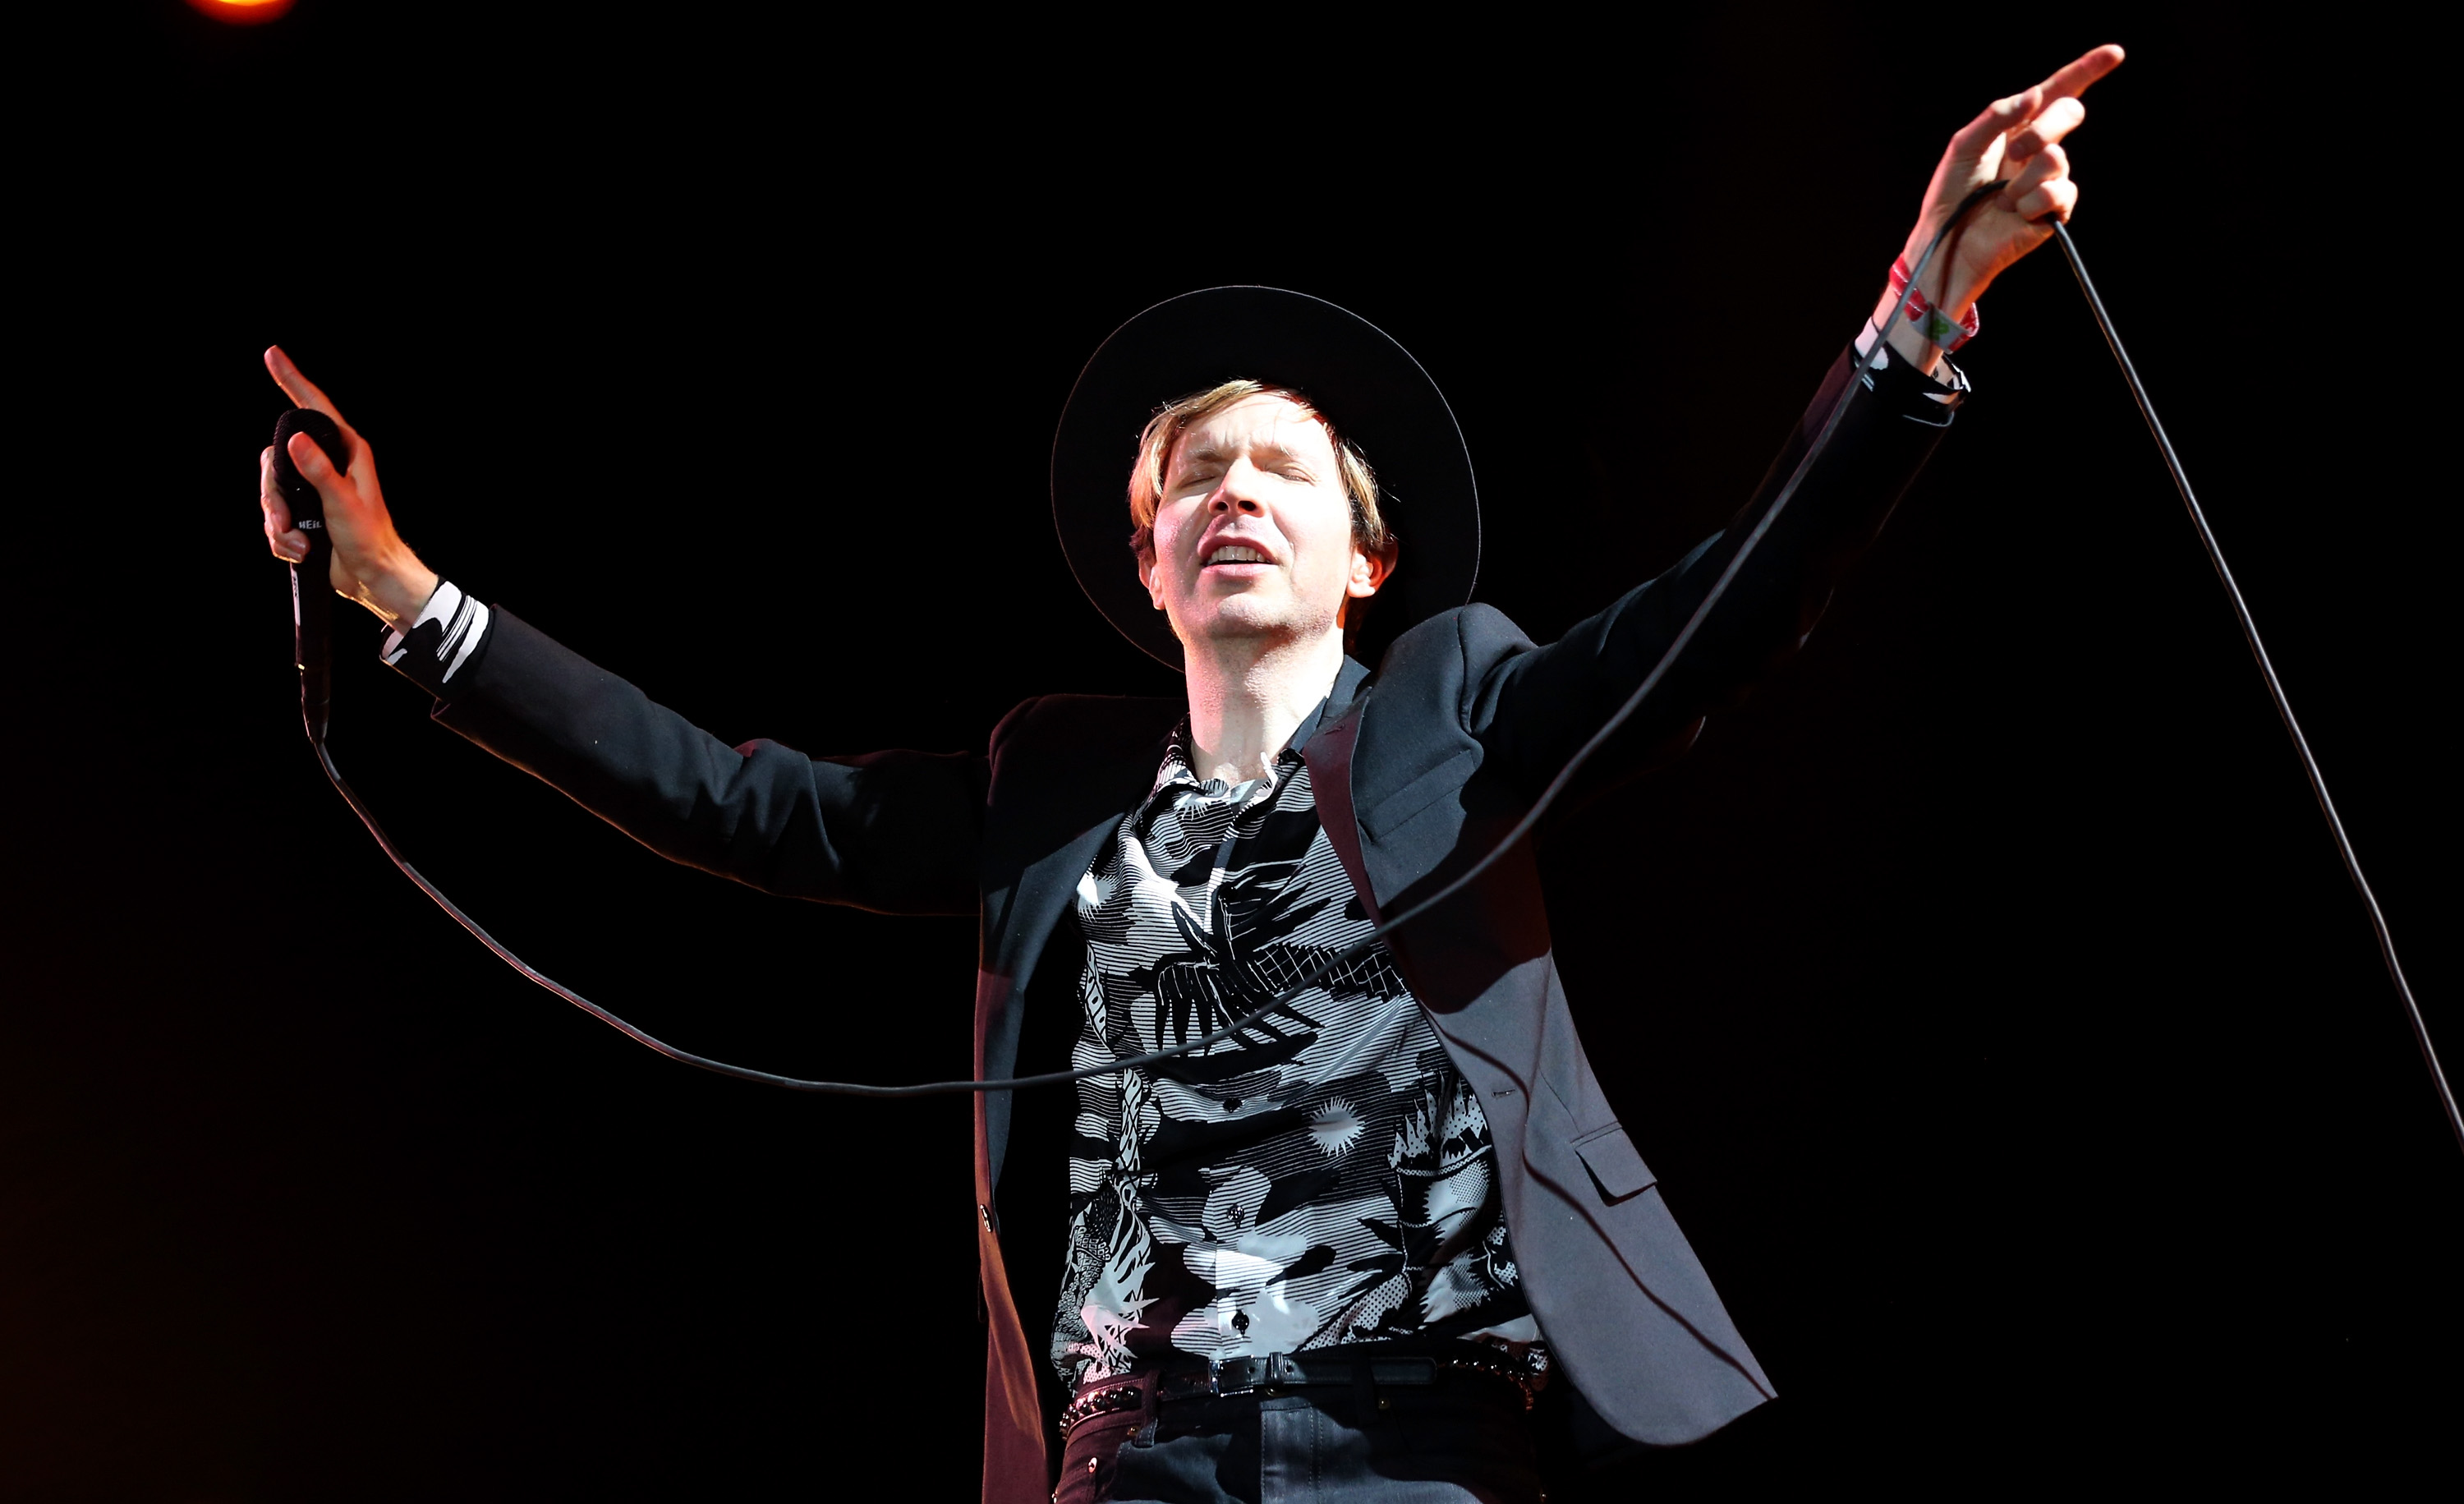 Musician Beck performs onstage during day 3 of the 2014 Coachella Valley Music &amp; Arts Festival at the Empire Polo Club on April 20, 2014 in Indio, California. (Karl Walter&mdash;2014 Getty Images)